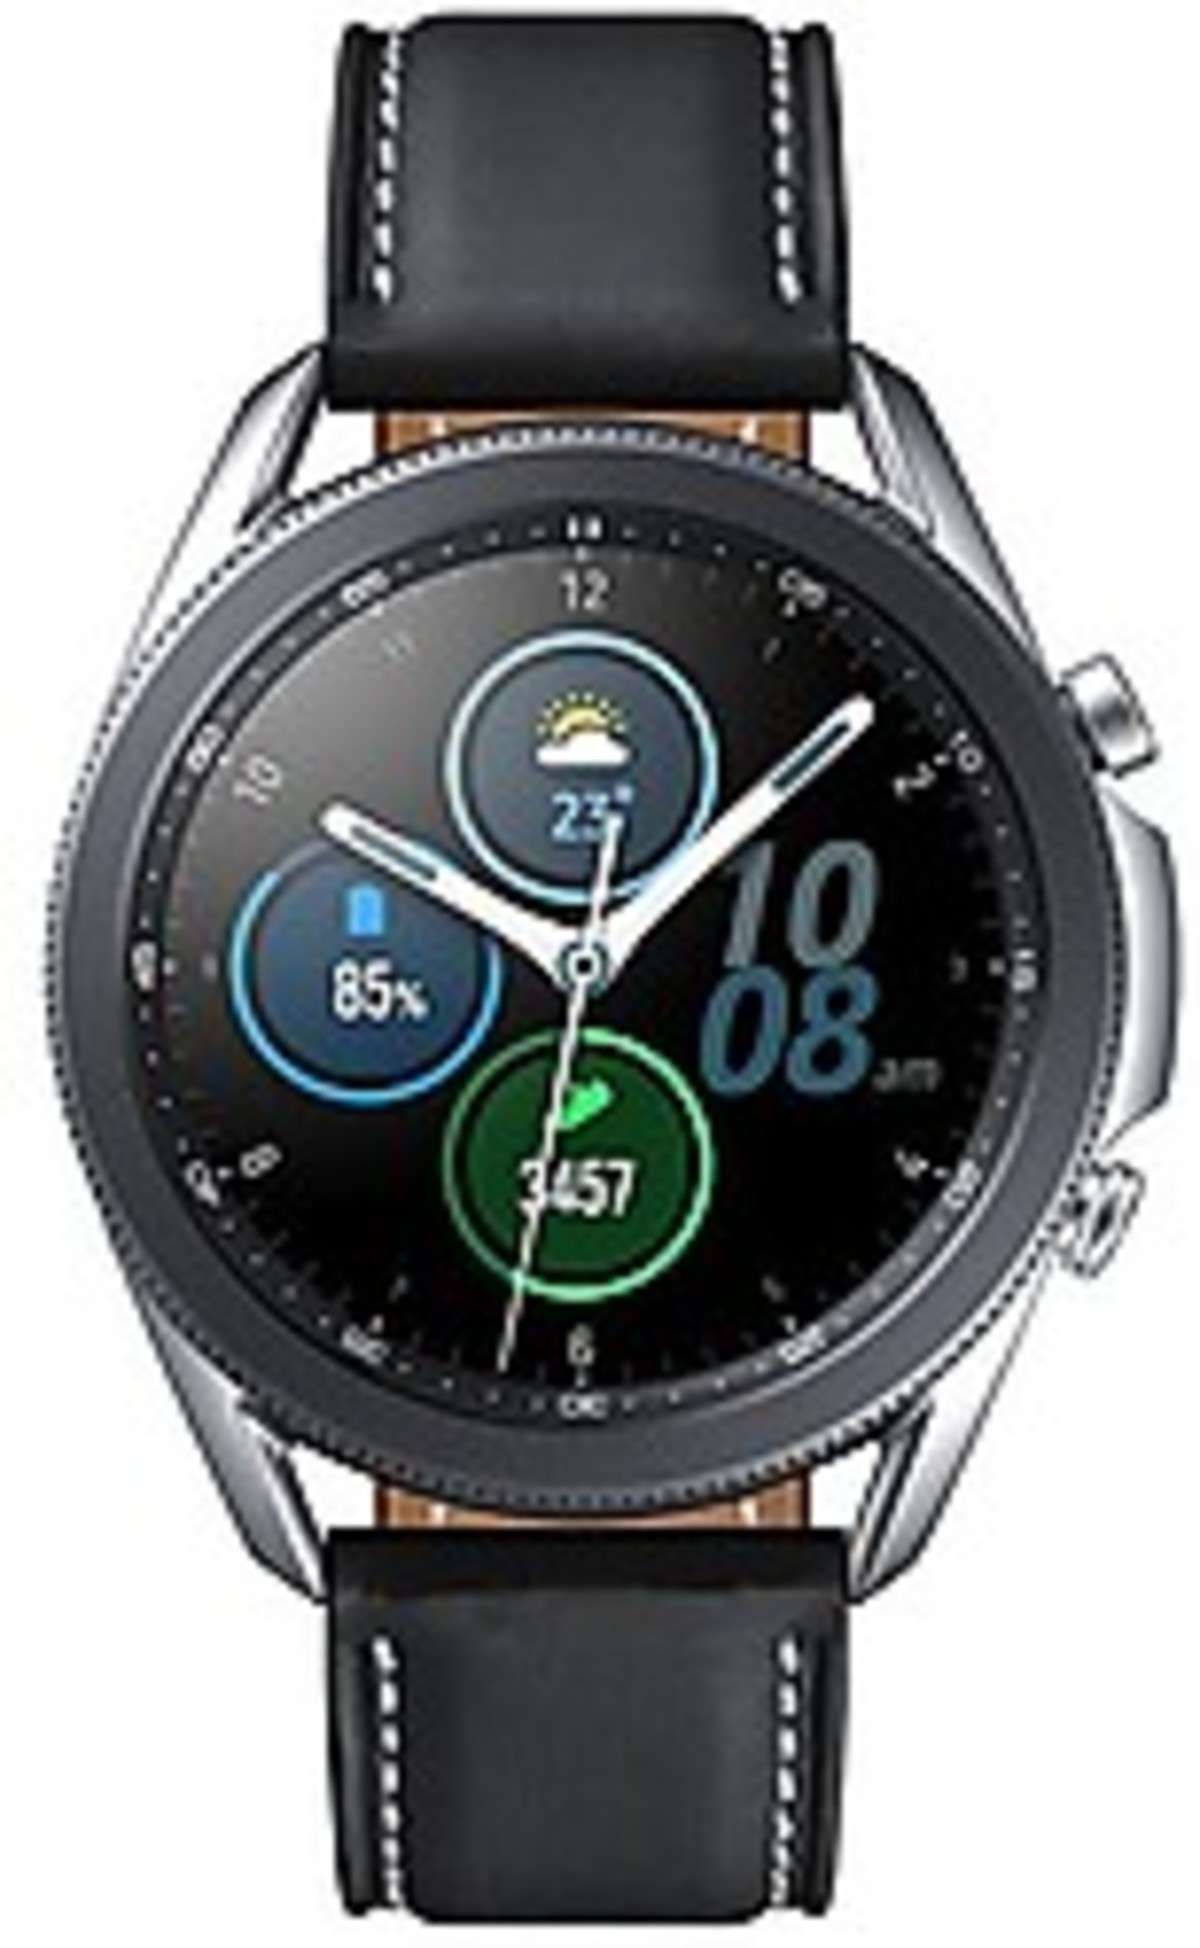 Samsung Galaxy Watch 3 Price In India Features And Full Specs